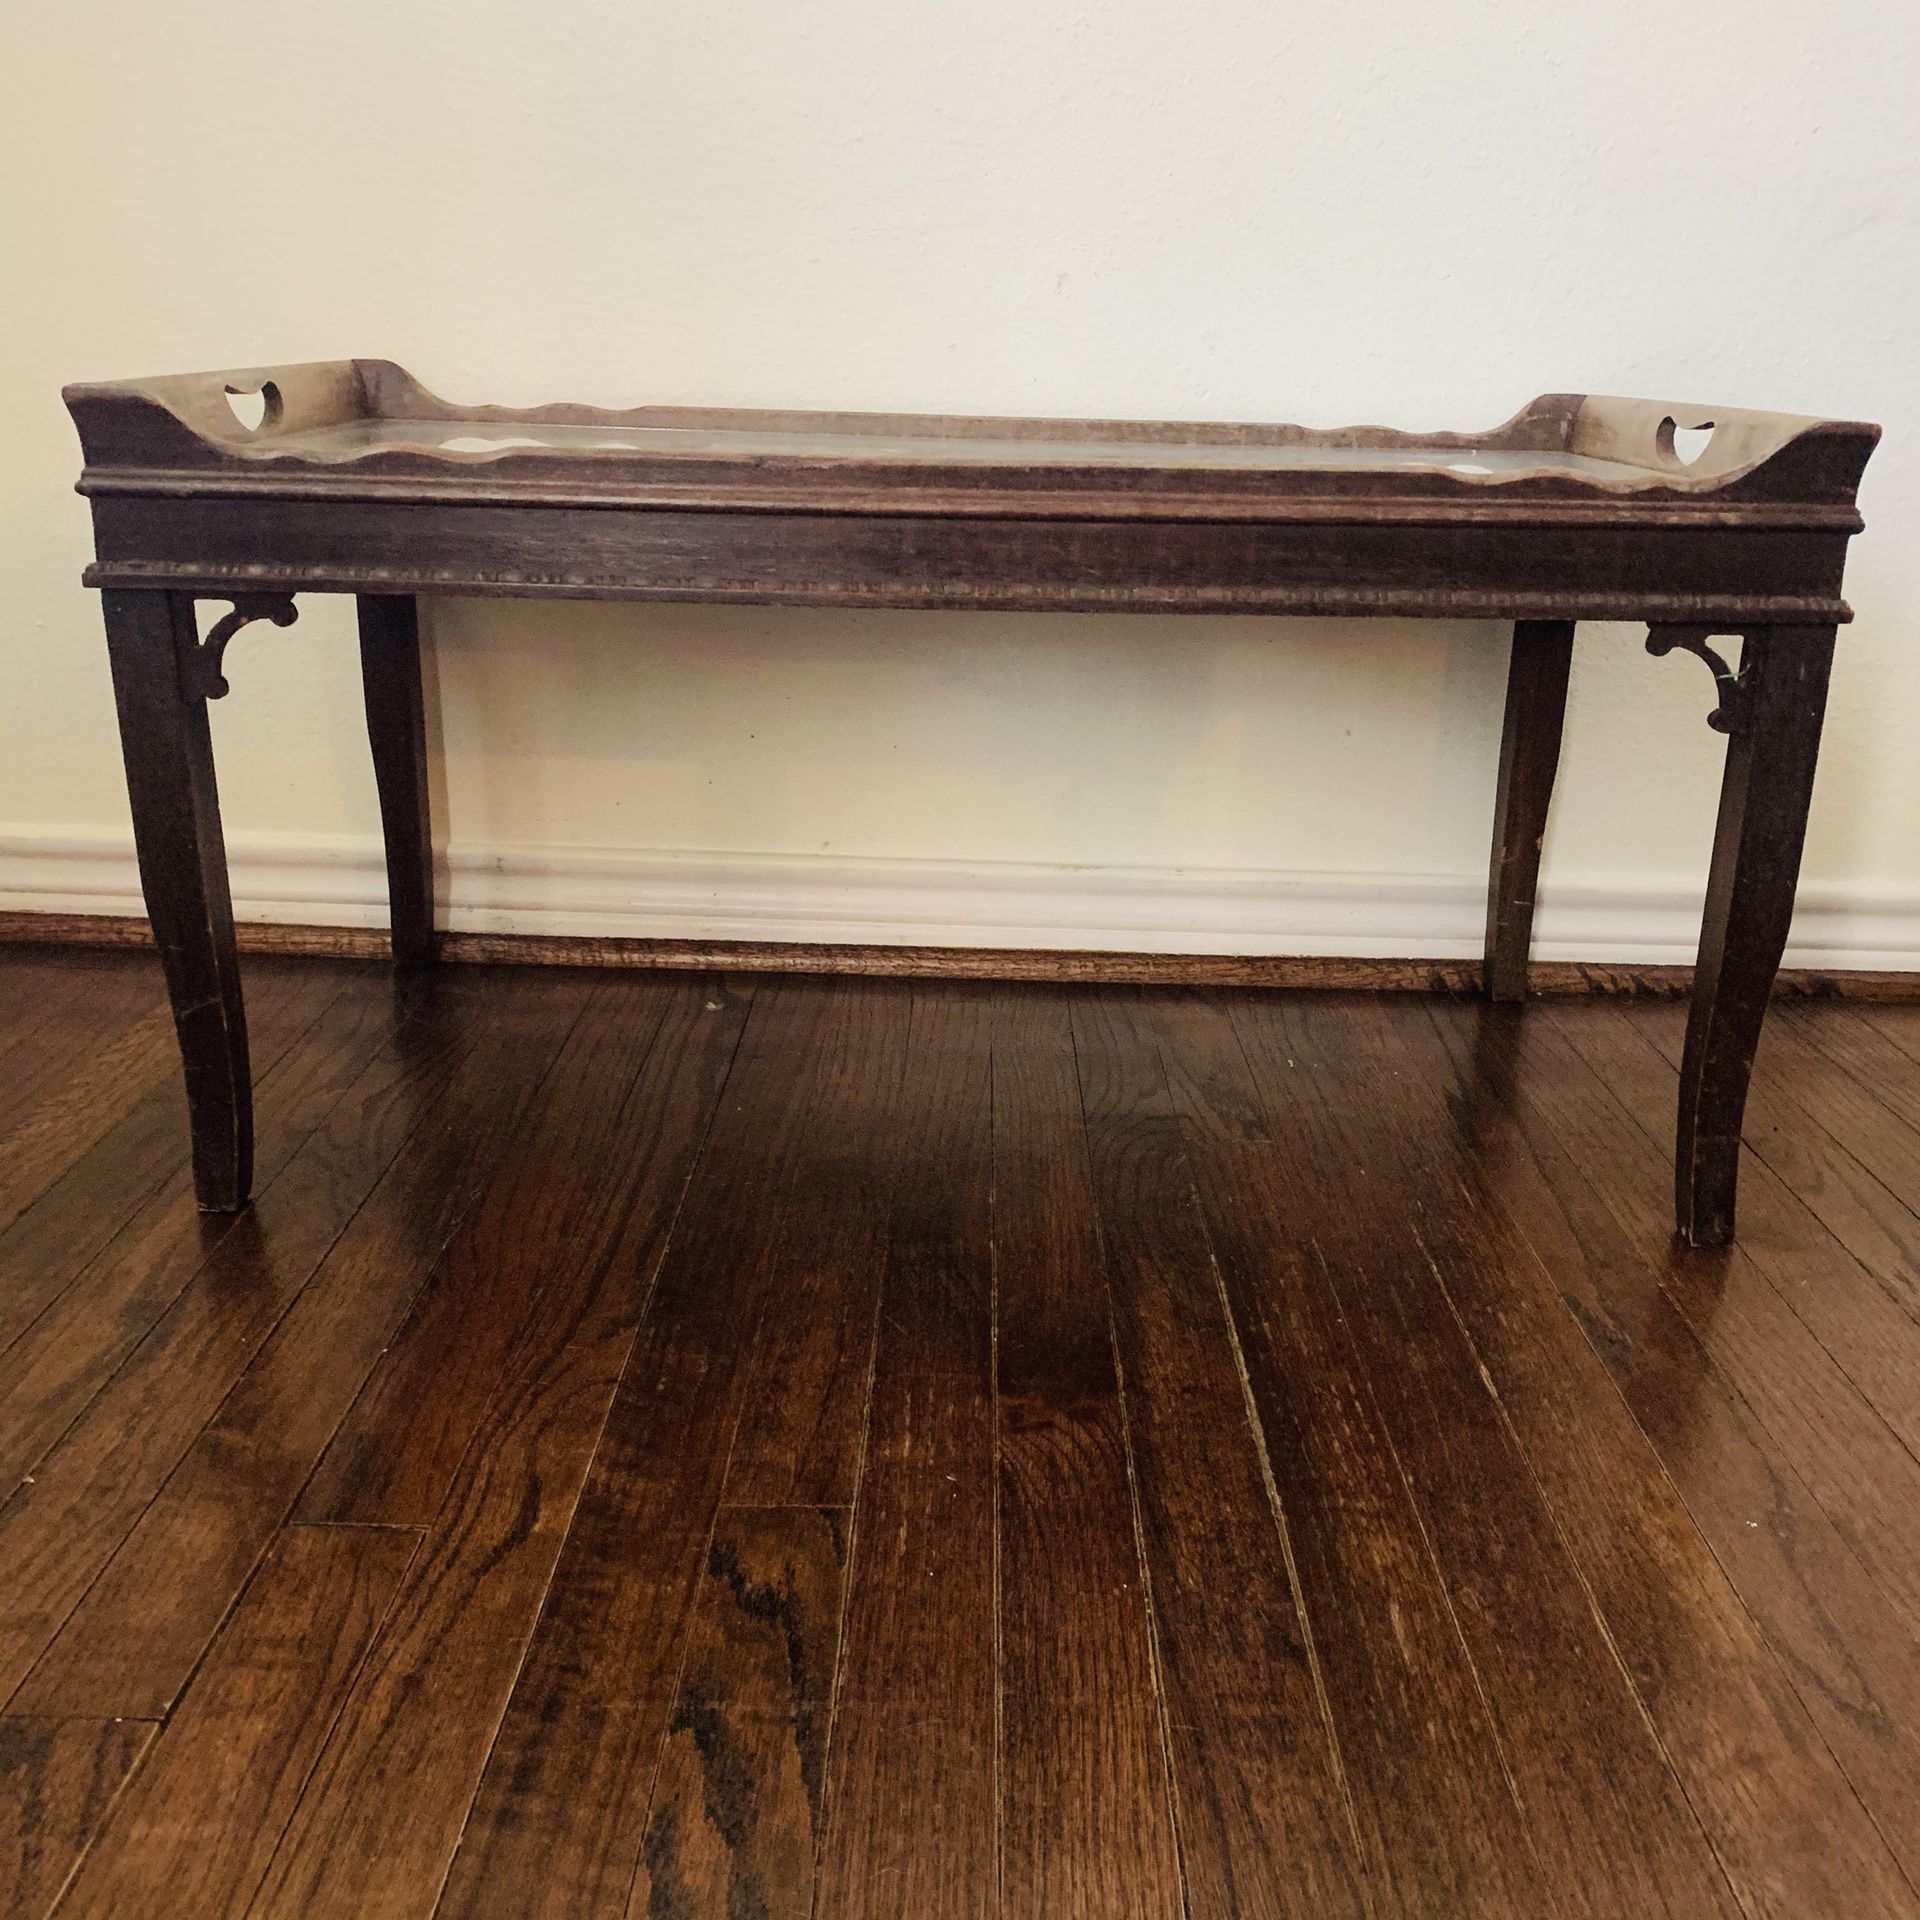 ANTIQUE COFFEE TABLE